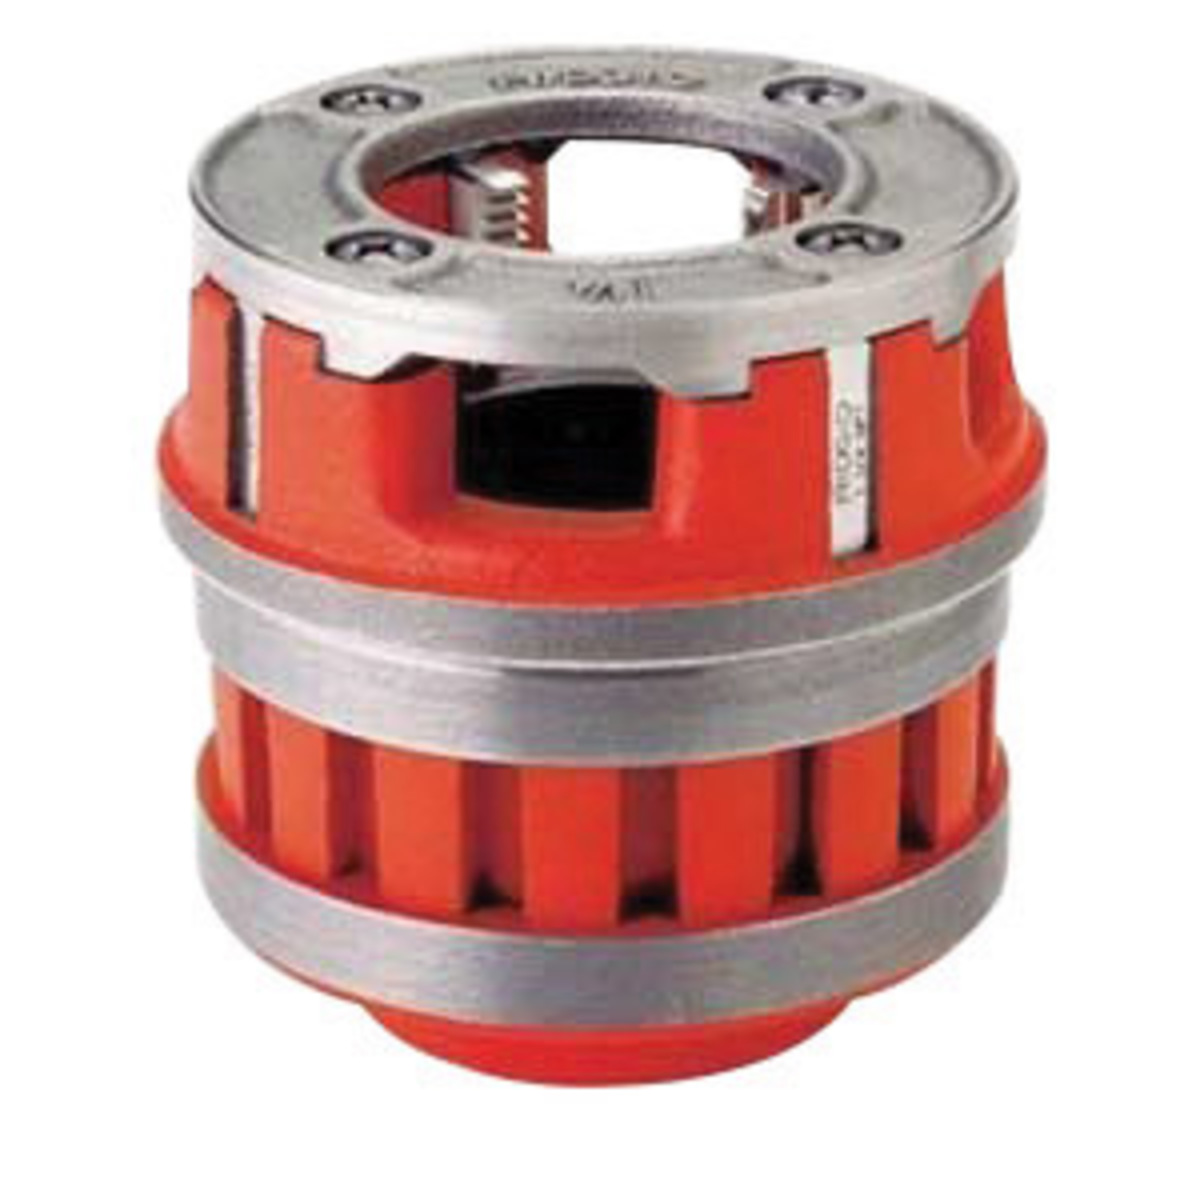 4 Pack for sale online RIDGID 37825 1/2 inch Pipe Threading Die 